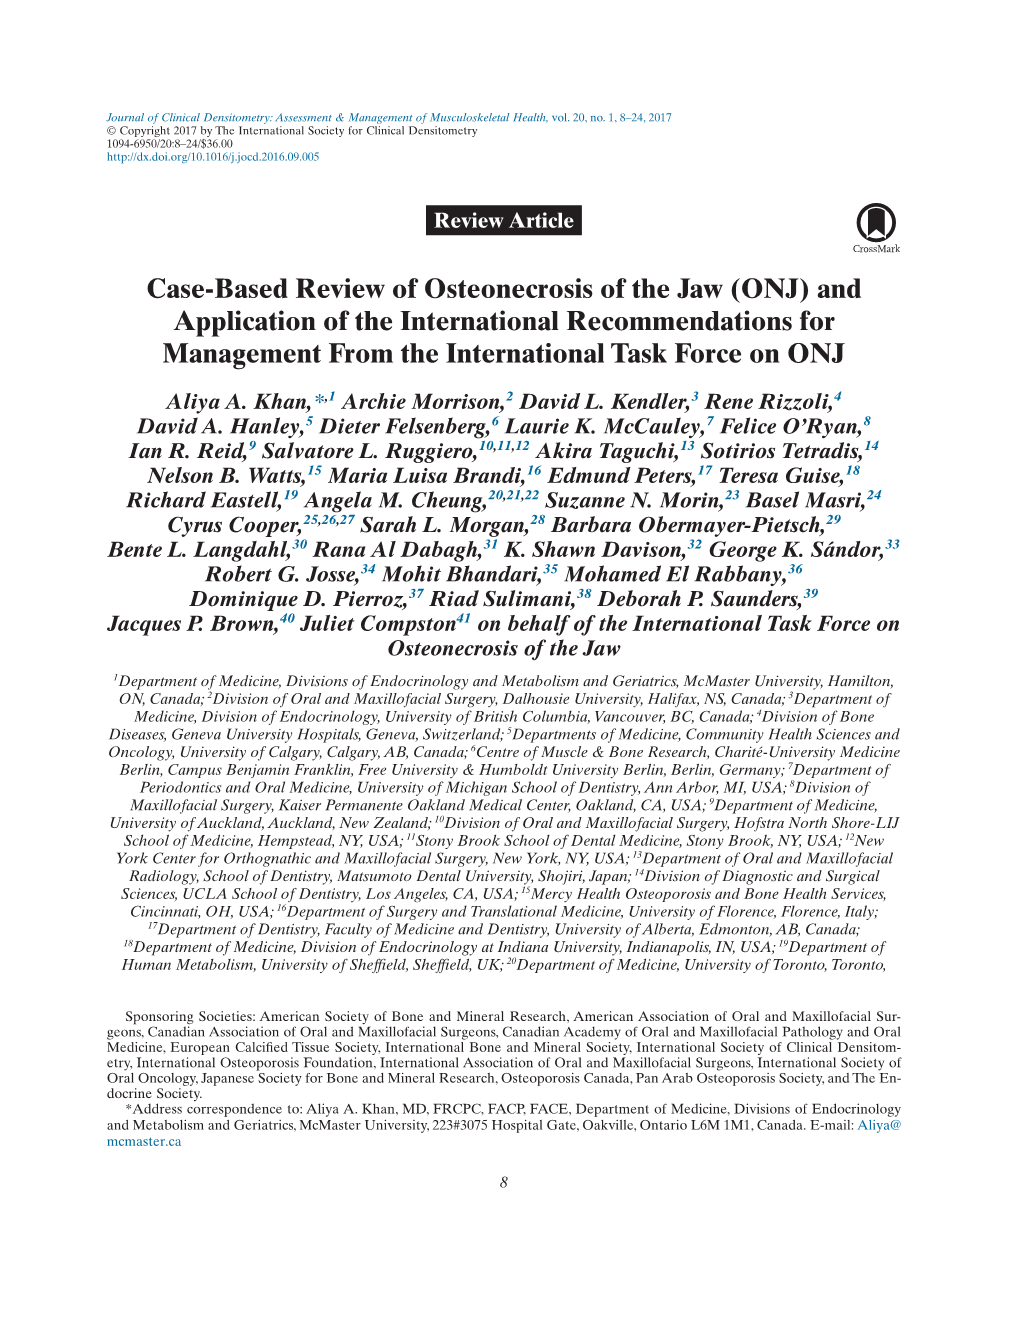 ONJ) and Application of the International Recommendations for Management from the International Task Force on ONJ